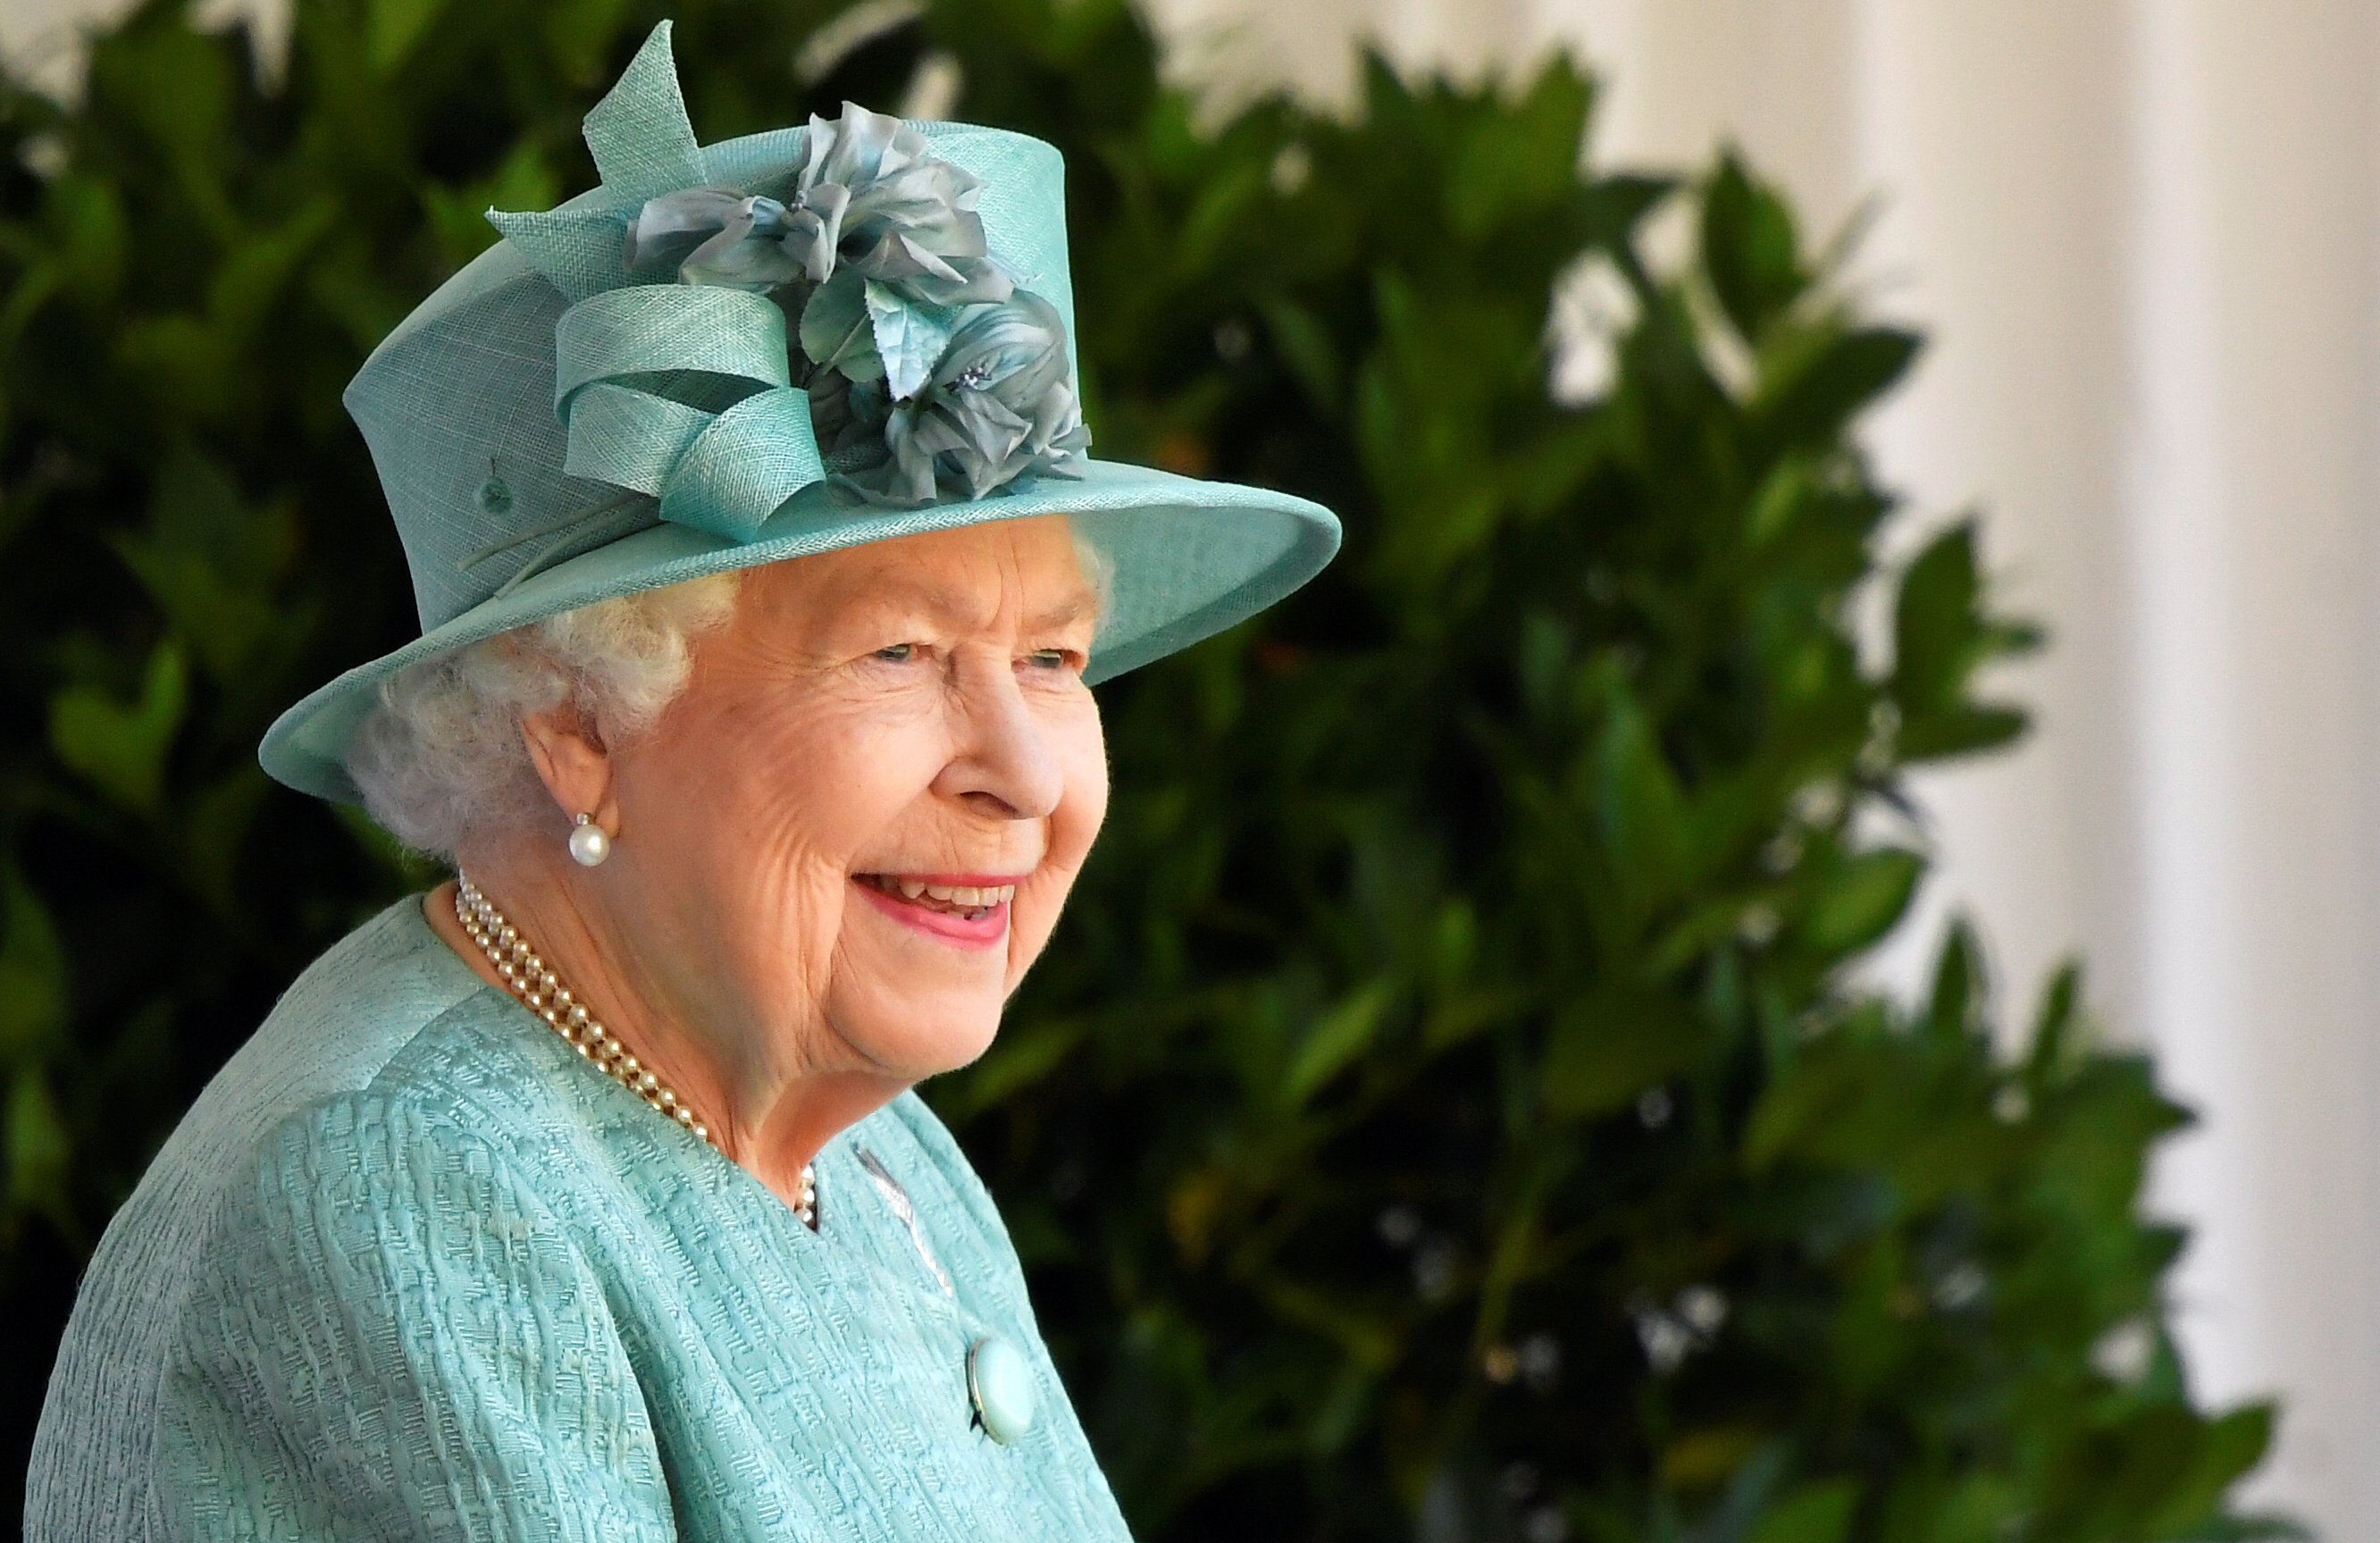 Queen Elizabeth II attends her birthday ceremony at Windsor Castle in Windsor, England on June 13, 2020 | Photo: Getty Images